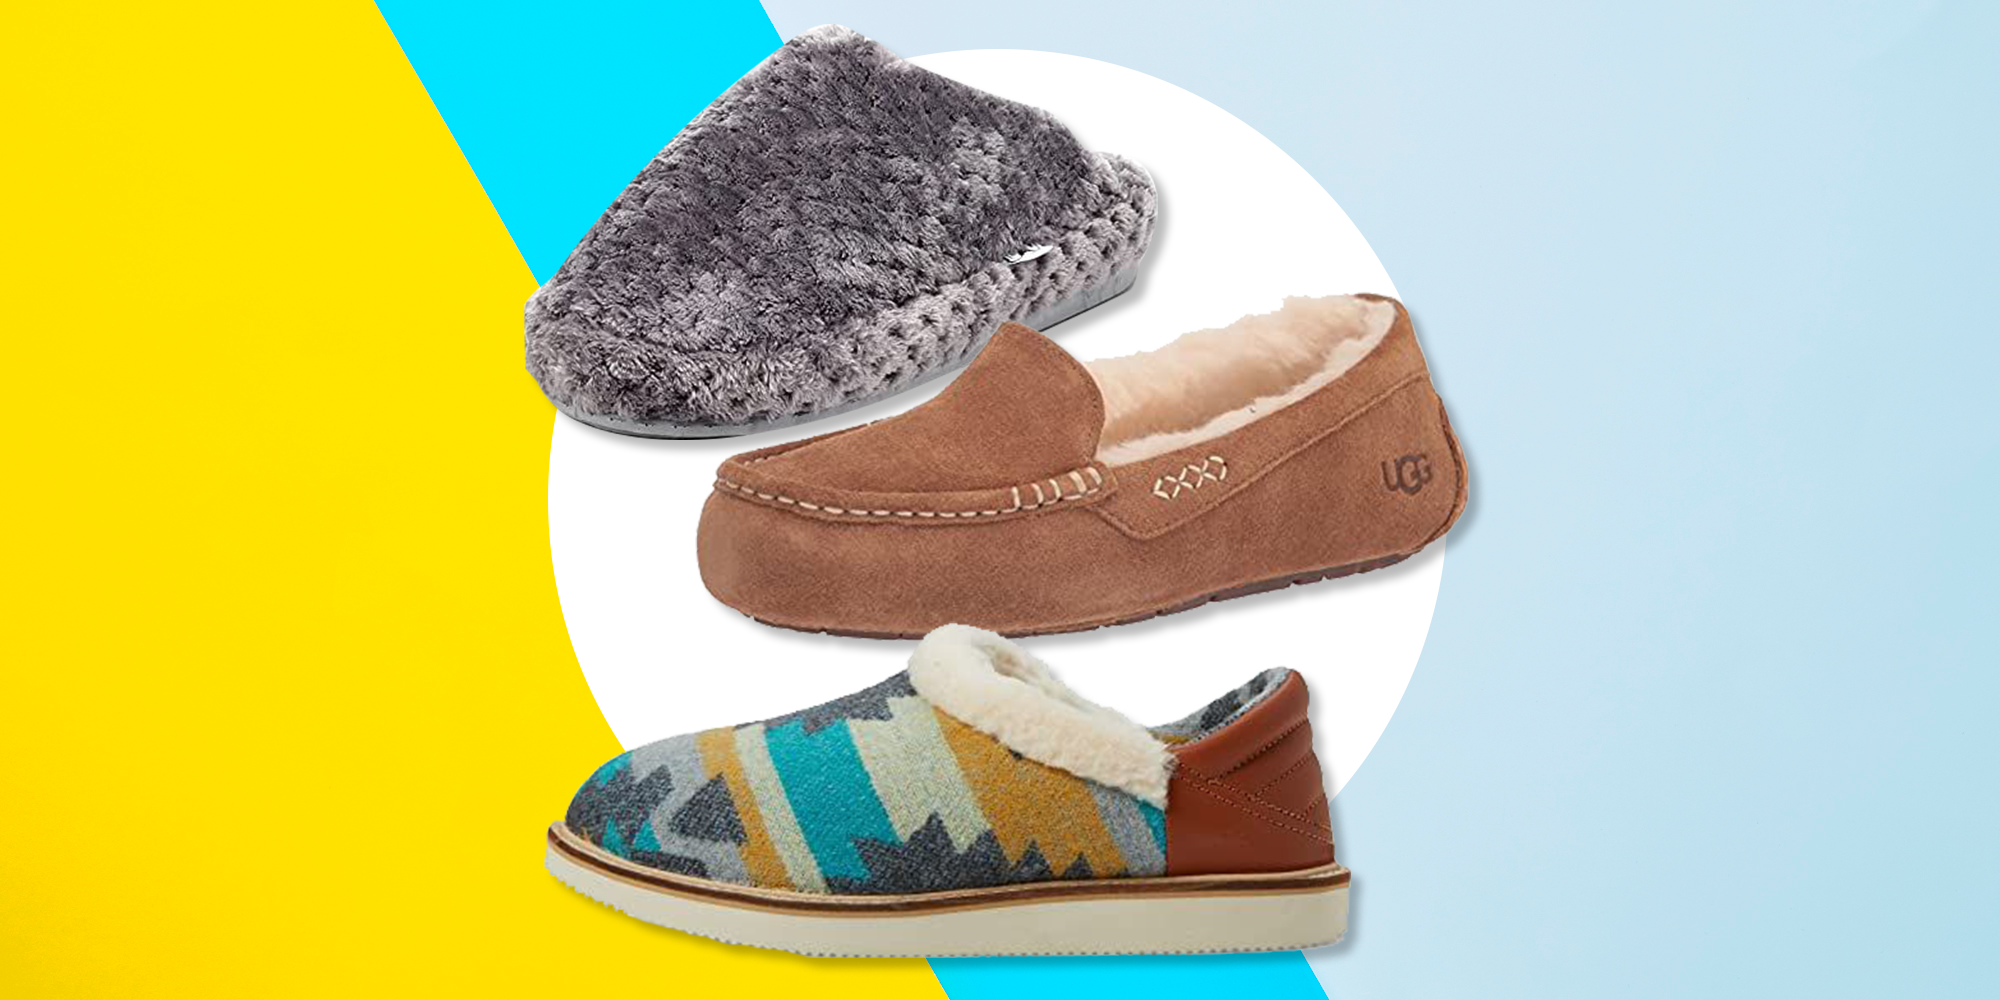 8 Of The Best Women's Slippers on Amazon - Forbes Vetted